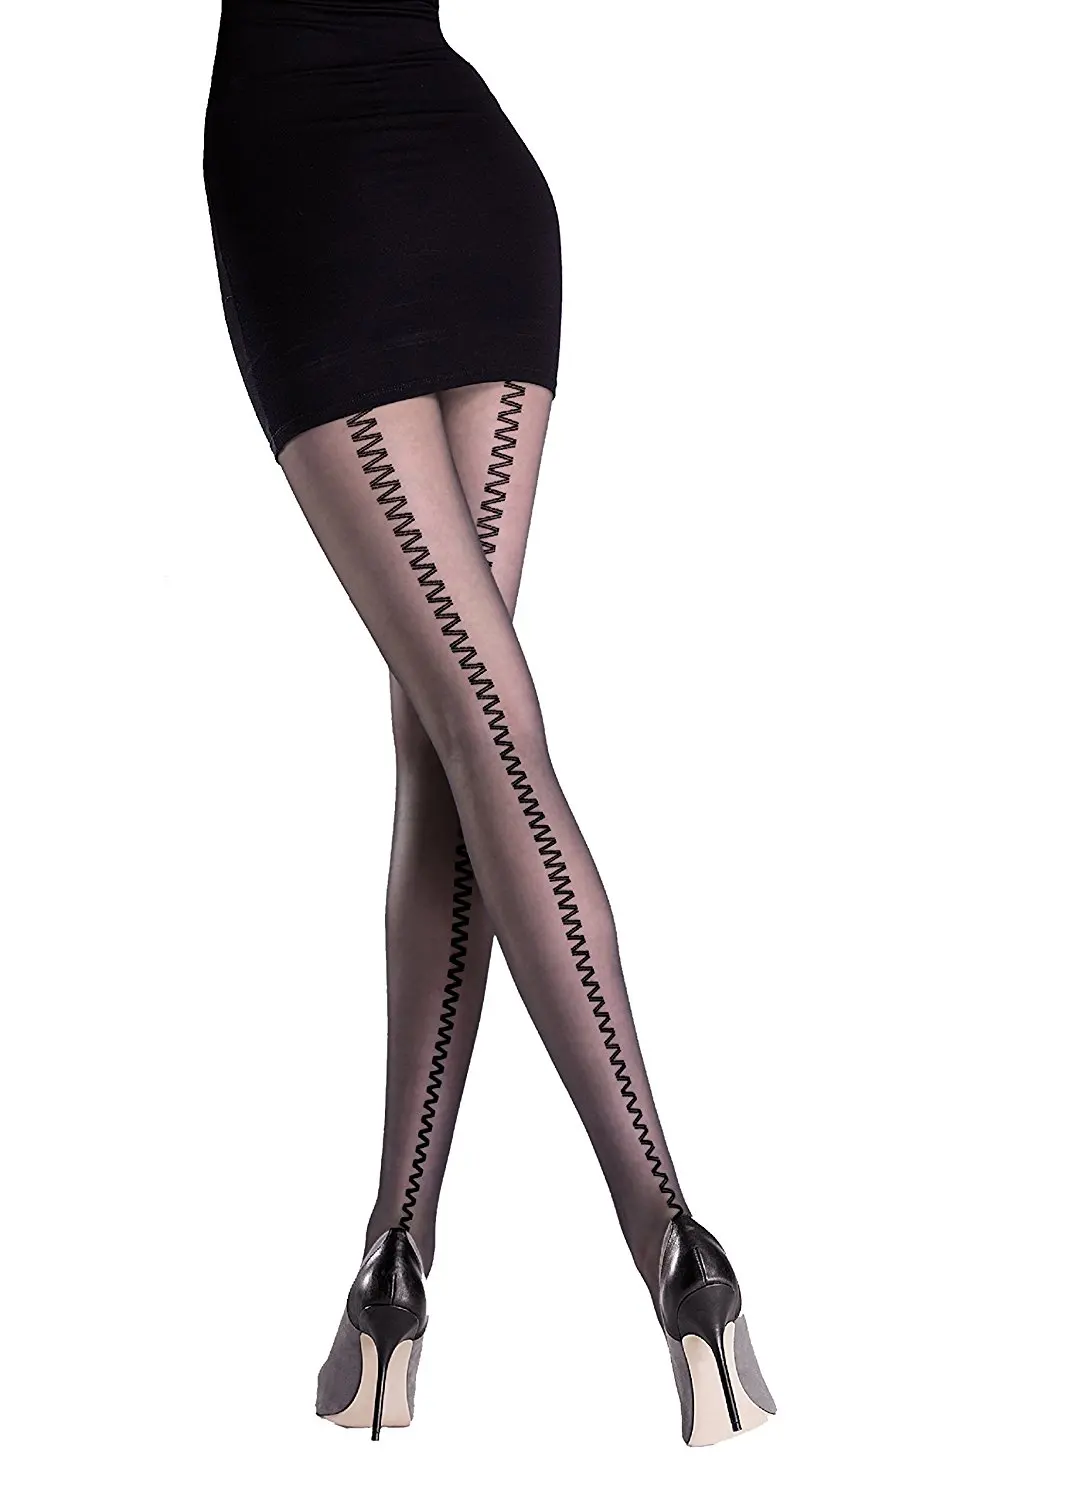 Buy Maori Ladies Patterned Tights 20 Denier by Knittex in Cheap Price ...